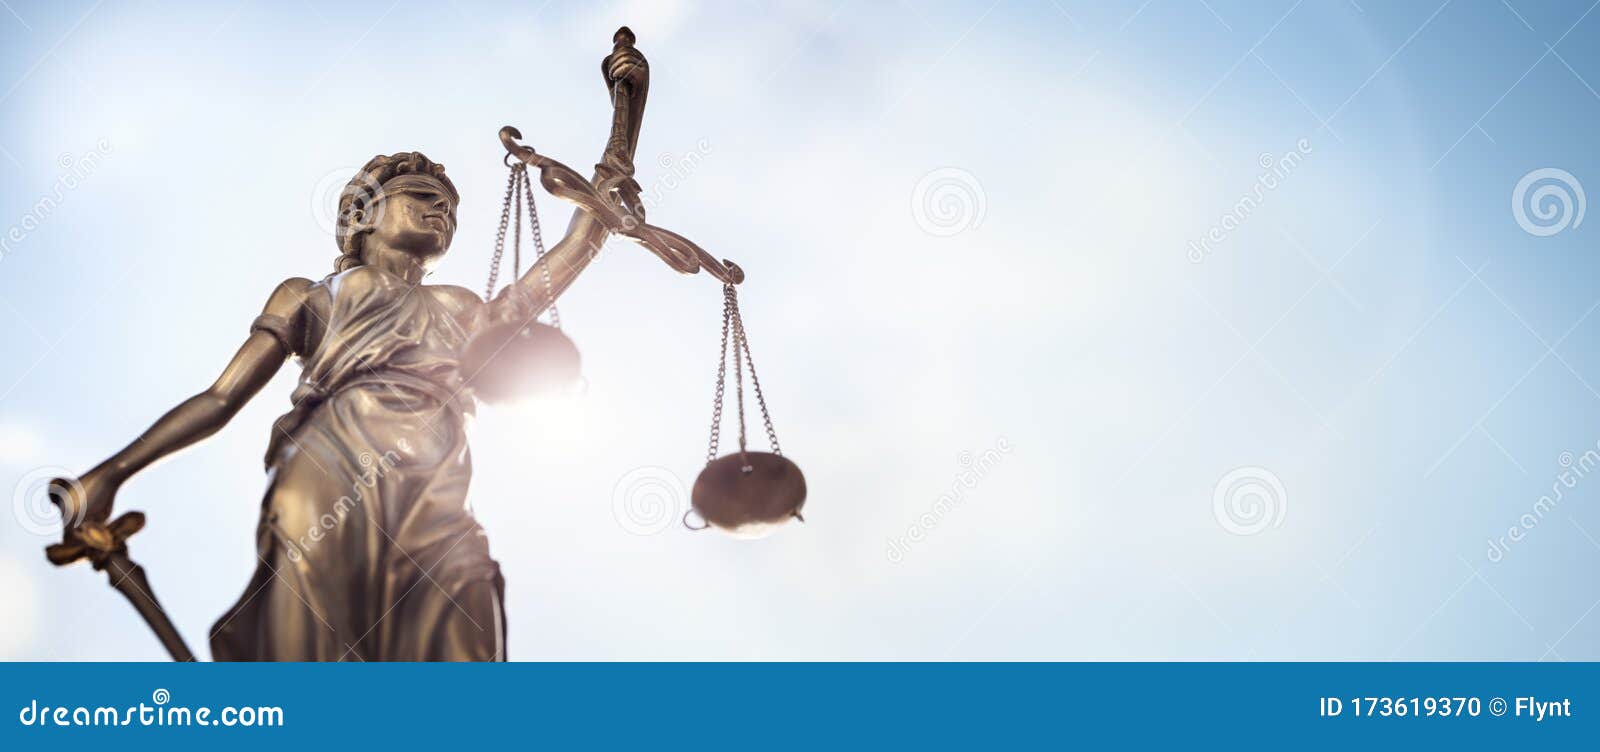 legal law concept statue of lady justice with scales of justice sky background